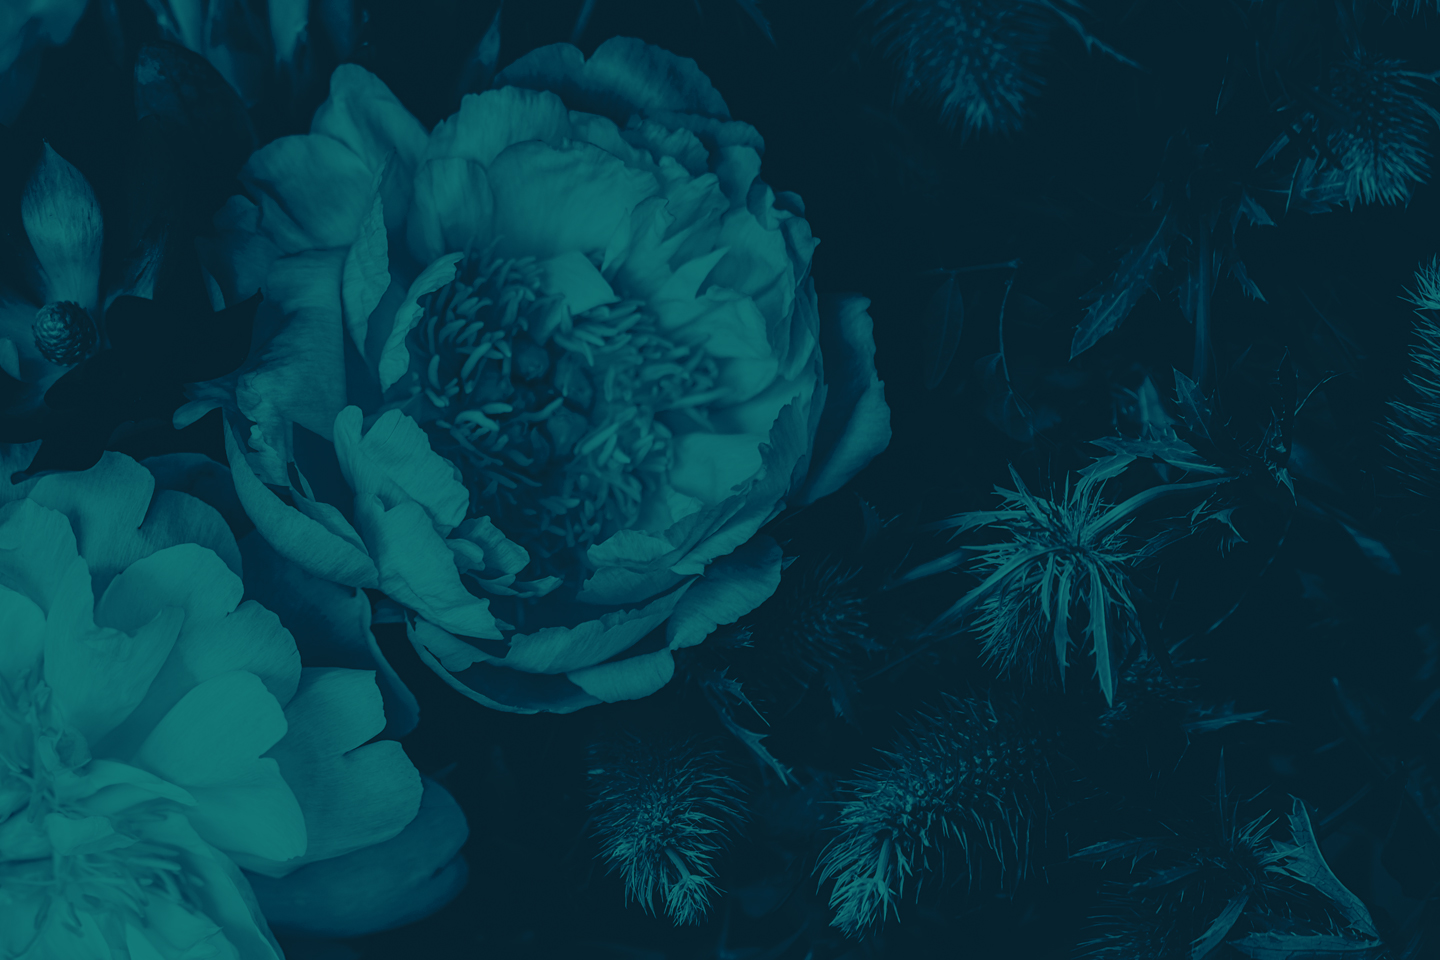 Floral image with a green gradient overlay